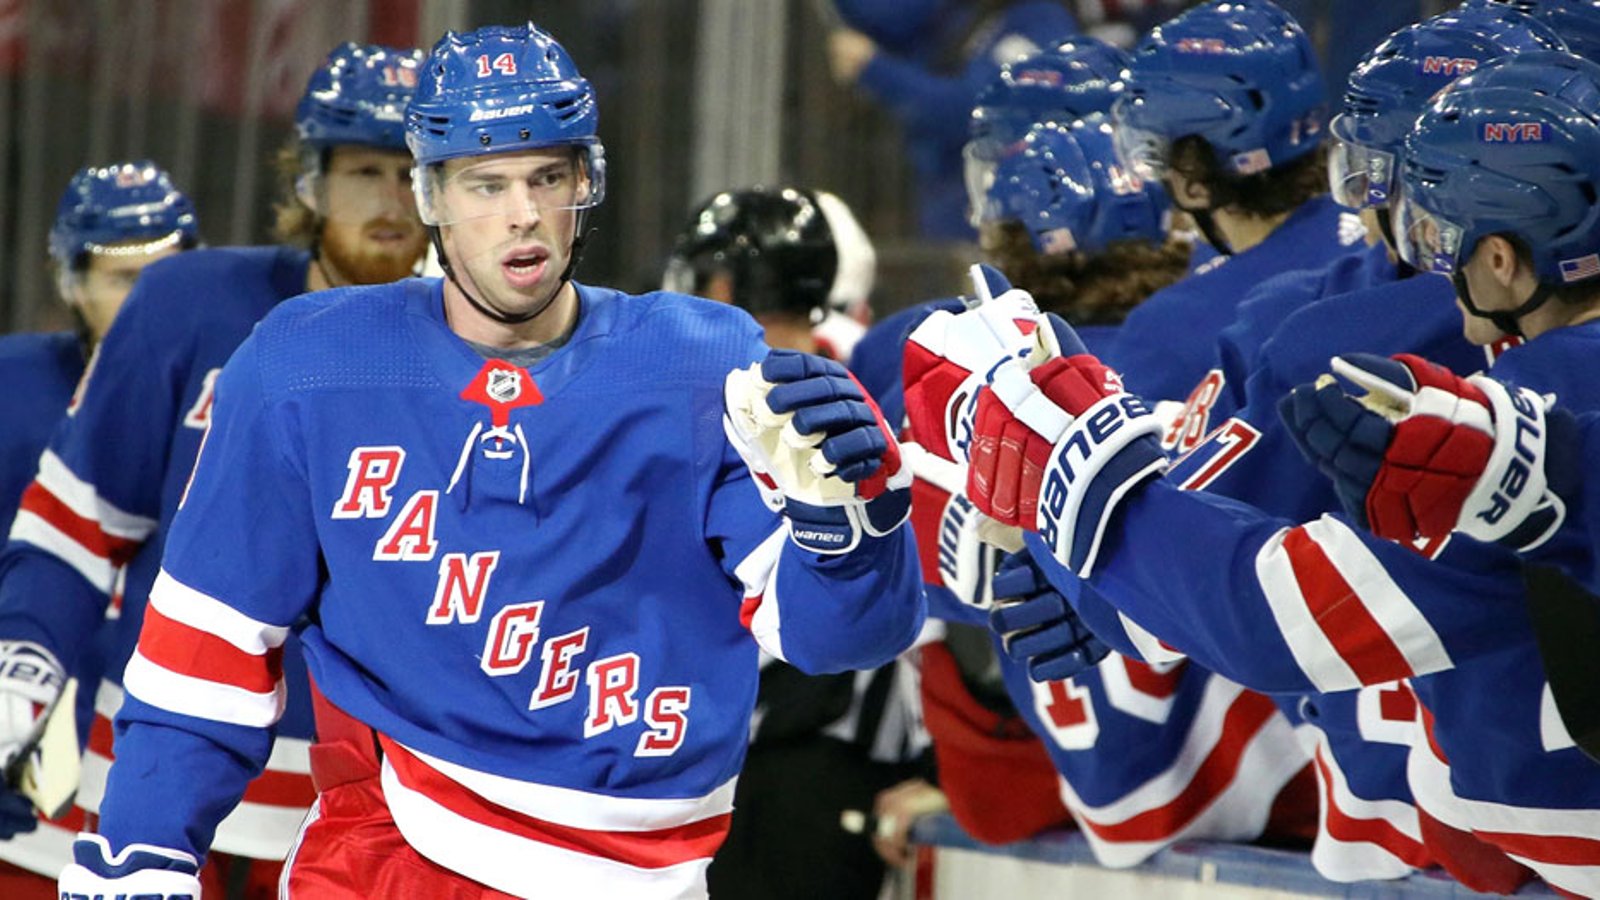 McKegg scores his first as a Ranger on hilarious blunder by Red Wings